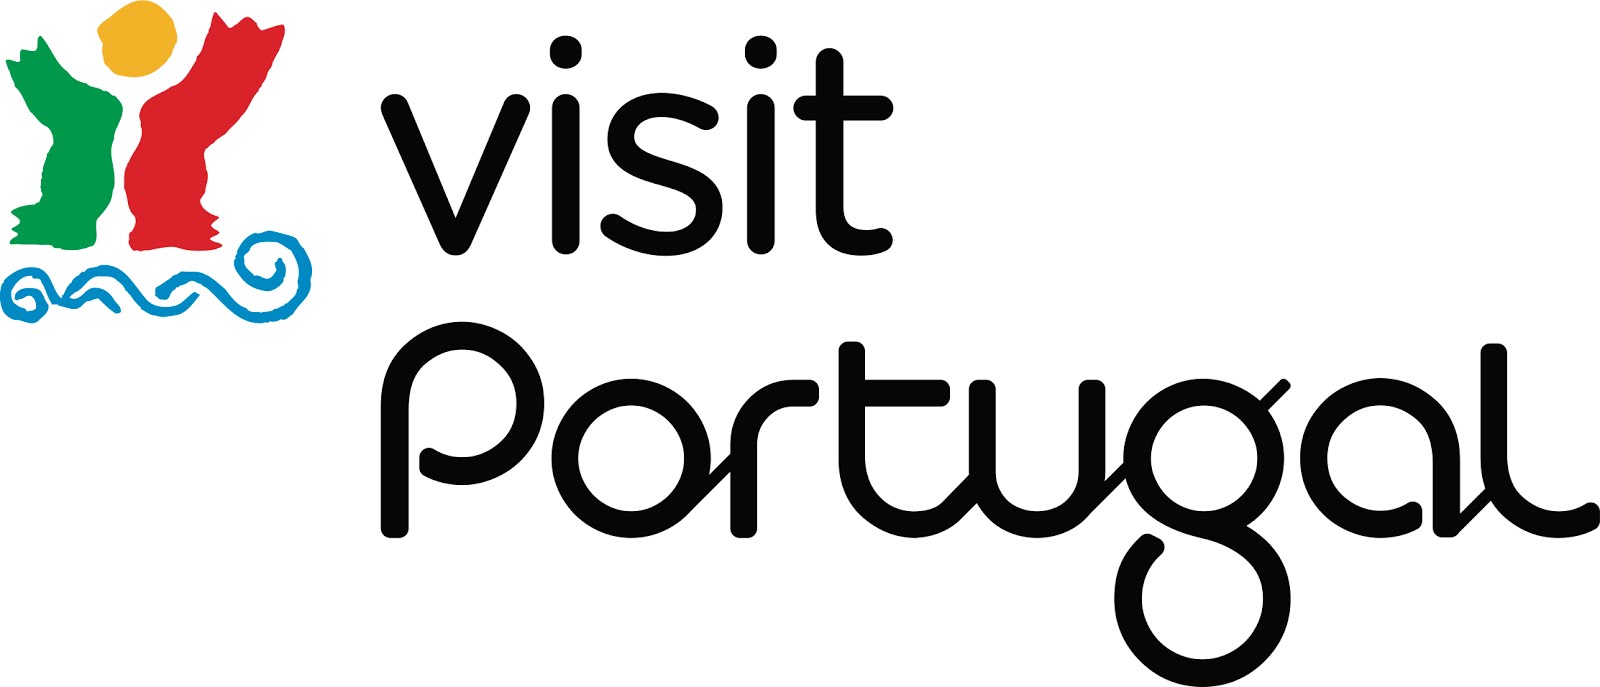 Official tourism office of Portugal